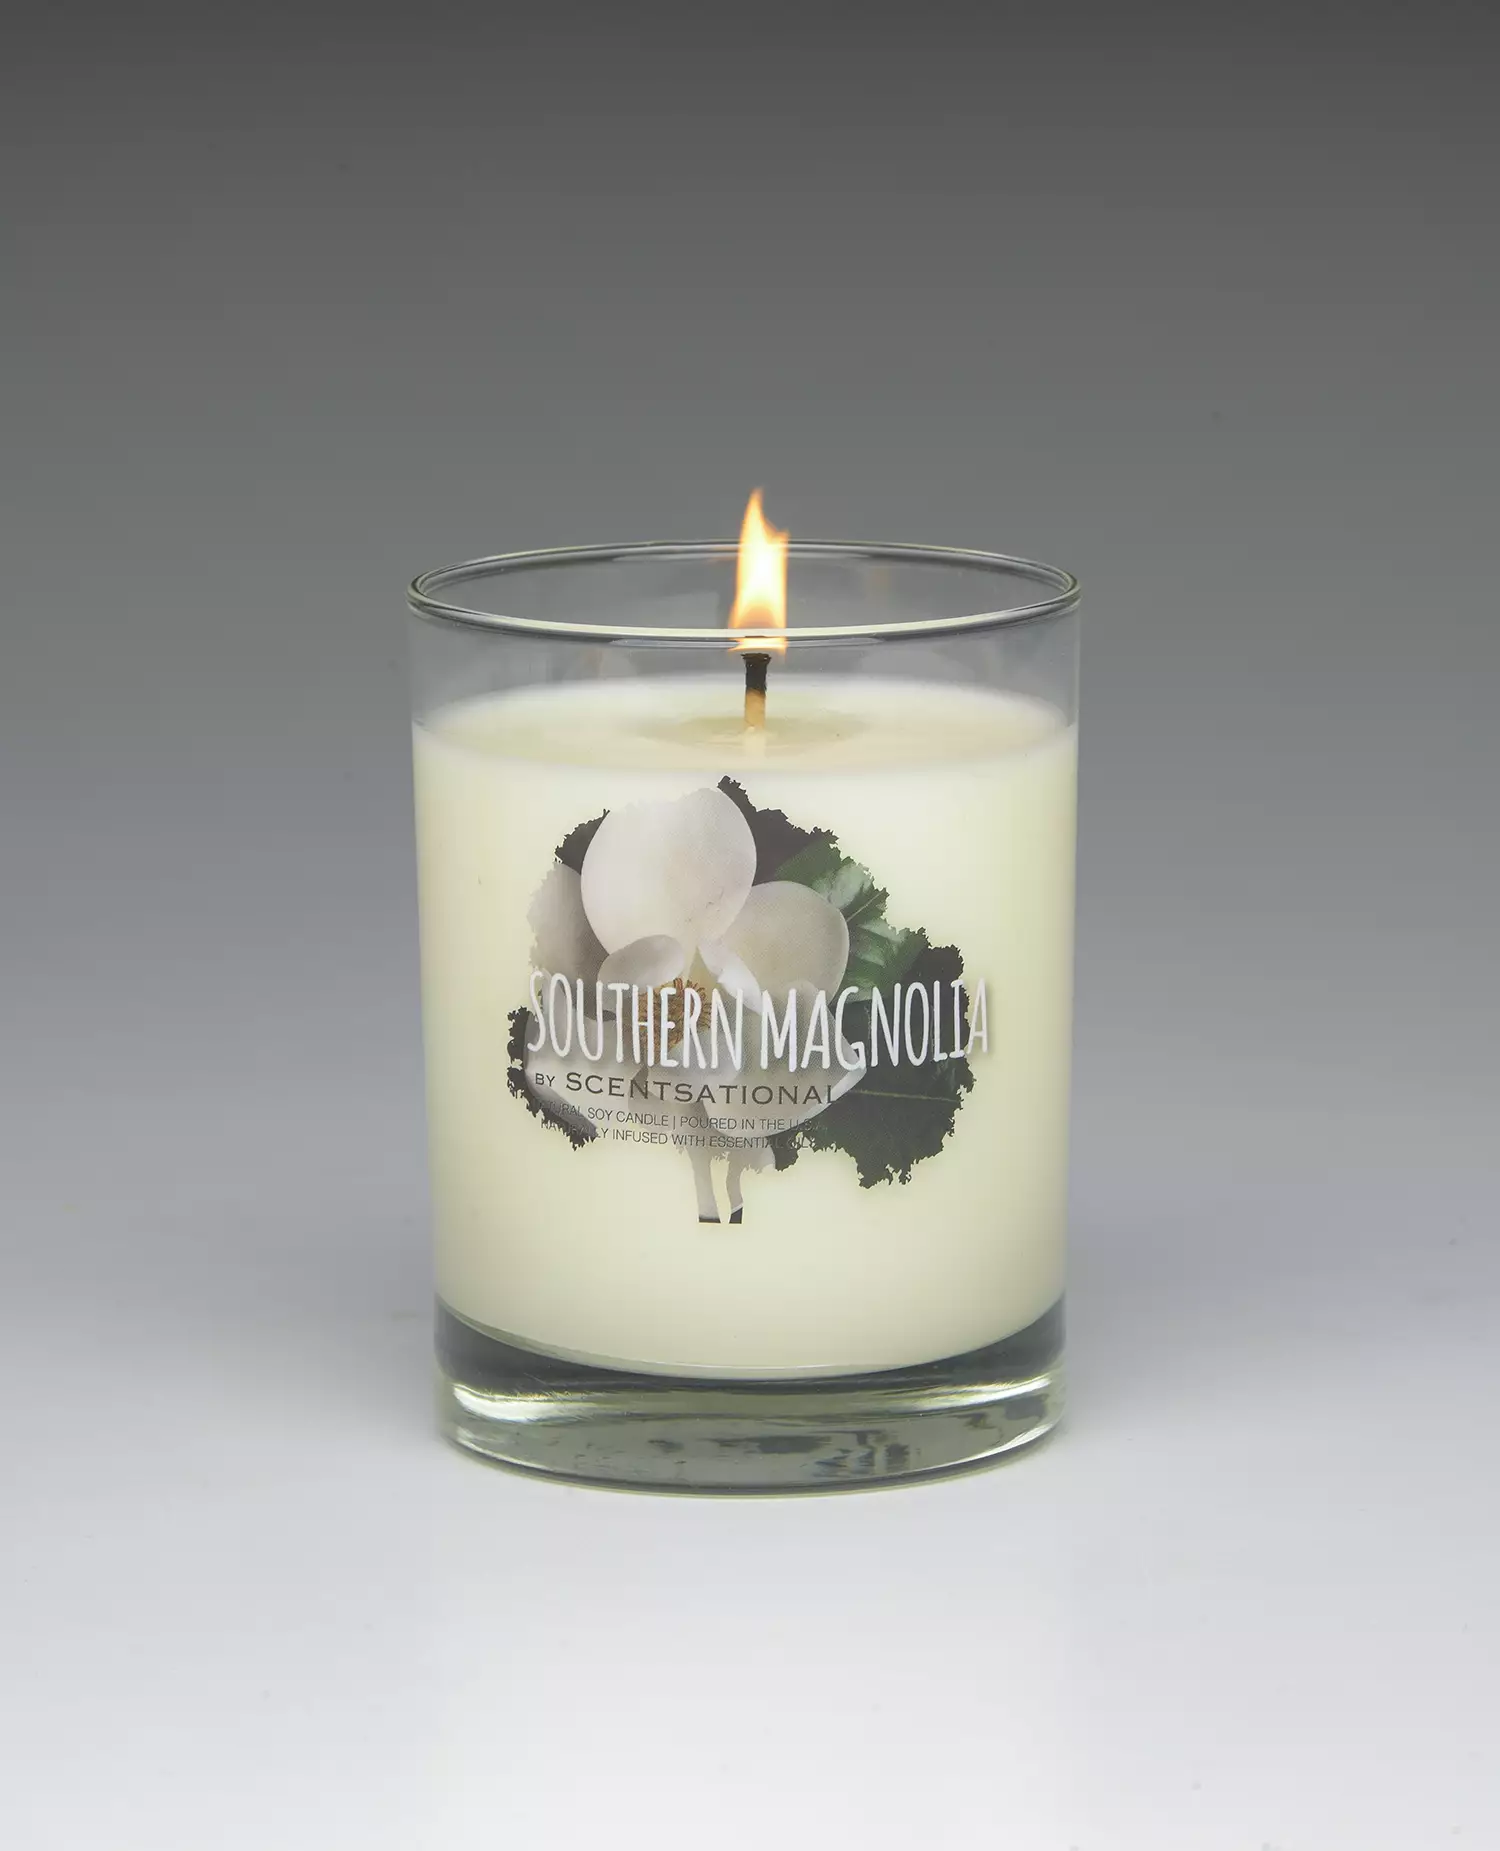 Southern Magnolia – 11oz scented candle burning